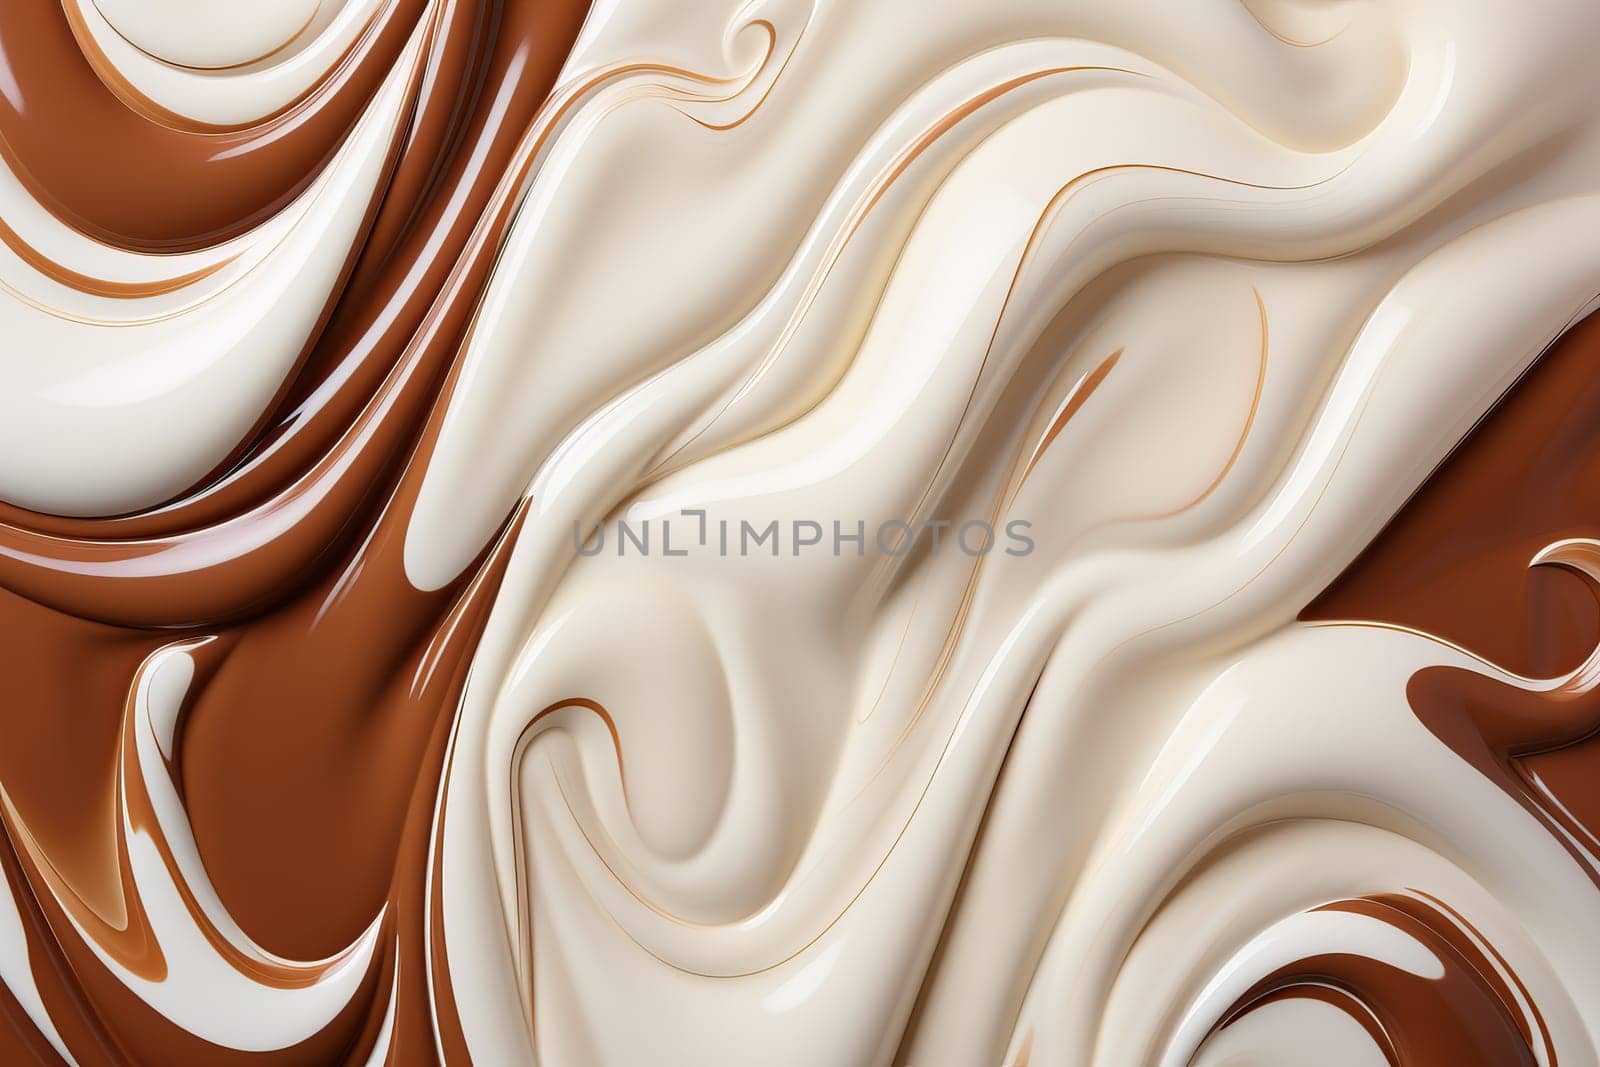 Texture from patterns of melted chocolate of different flavors, chocolate background.